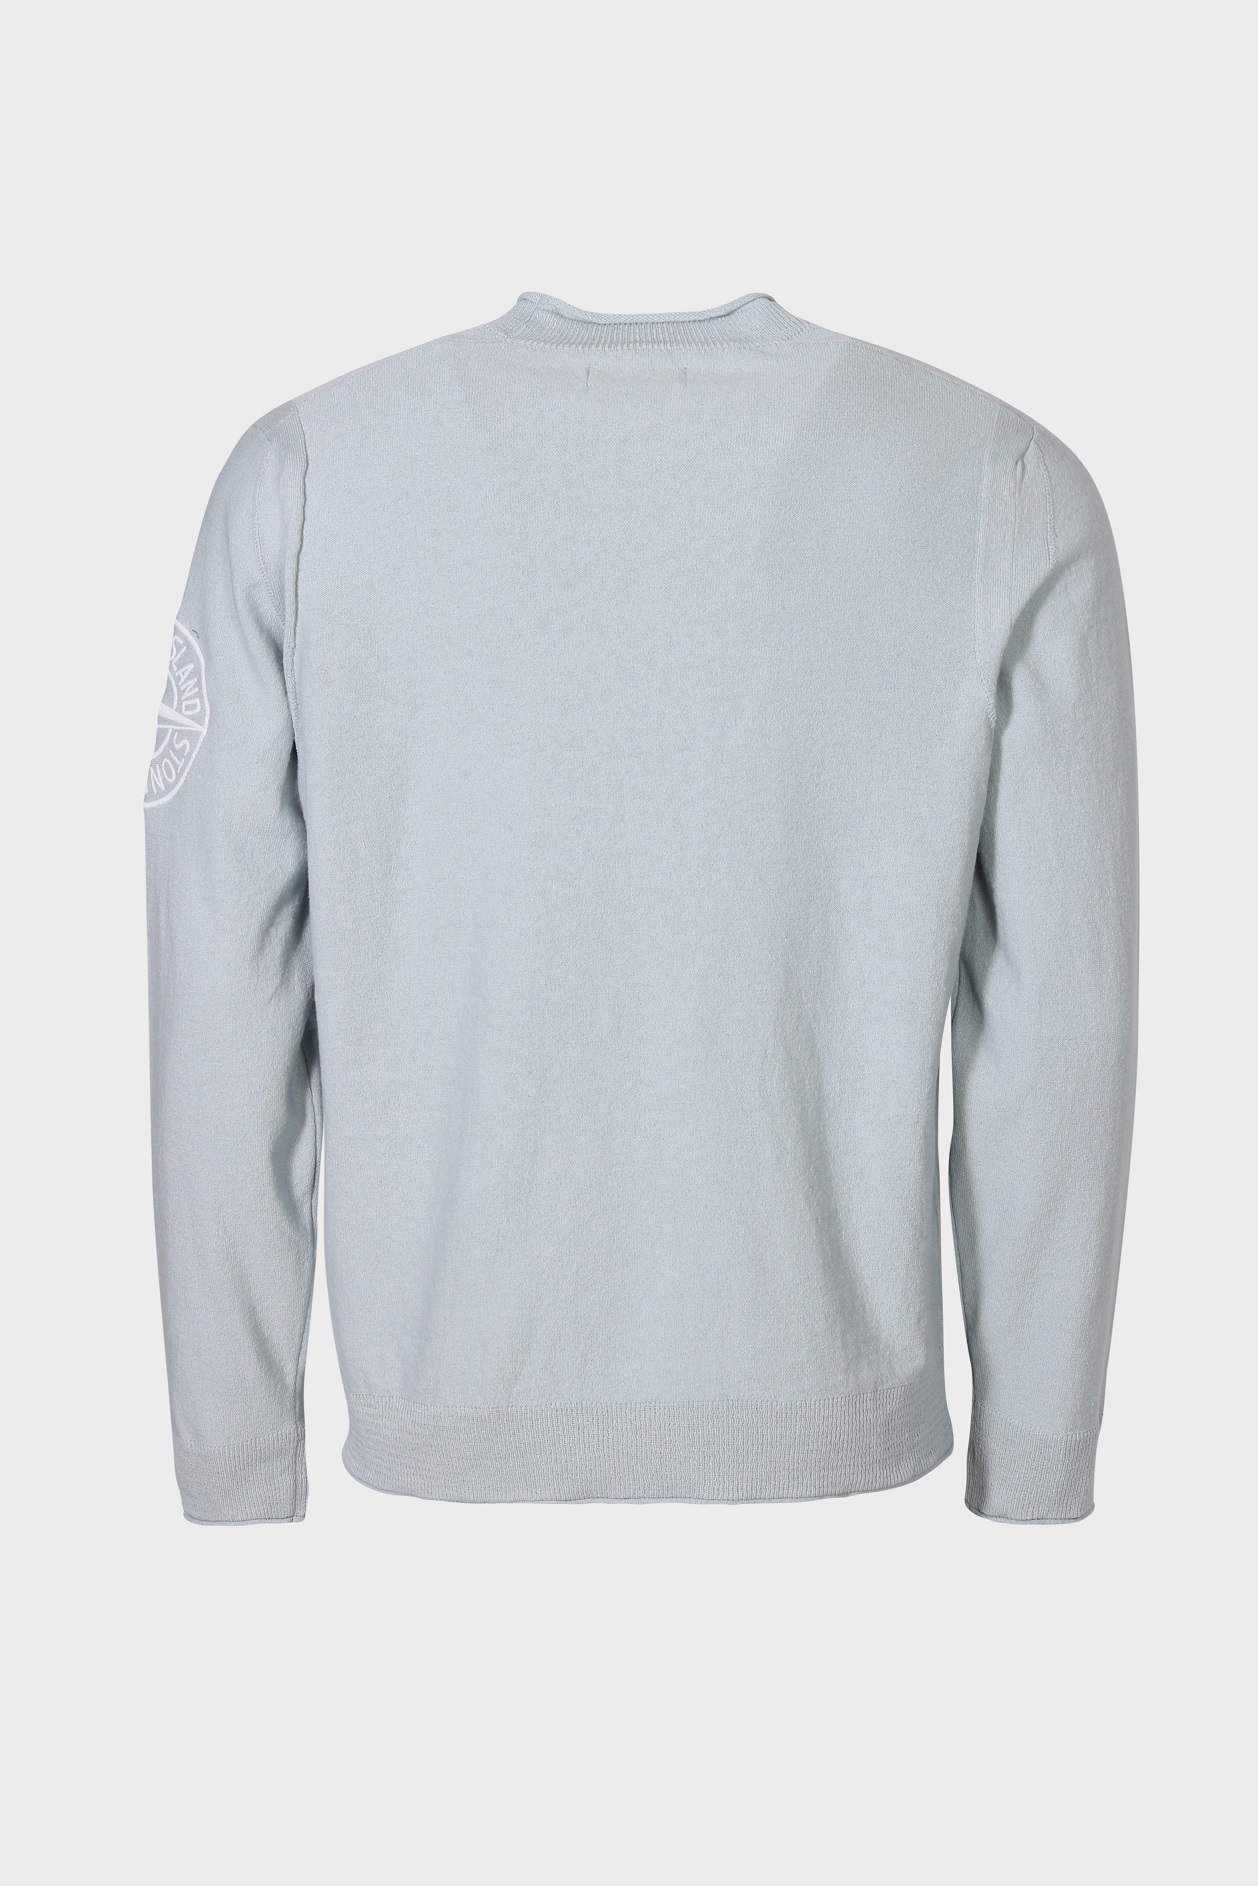 STONE ISLAND Cotton Knit Pullover in Sky Blue M